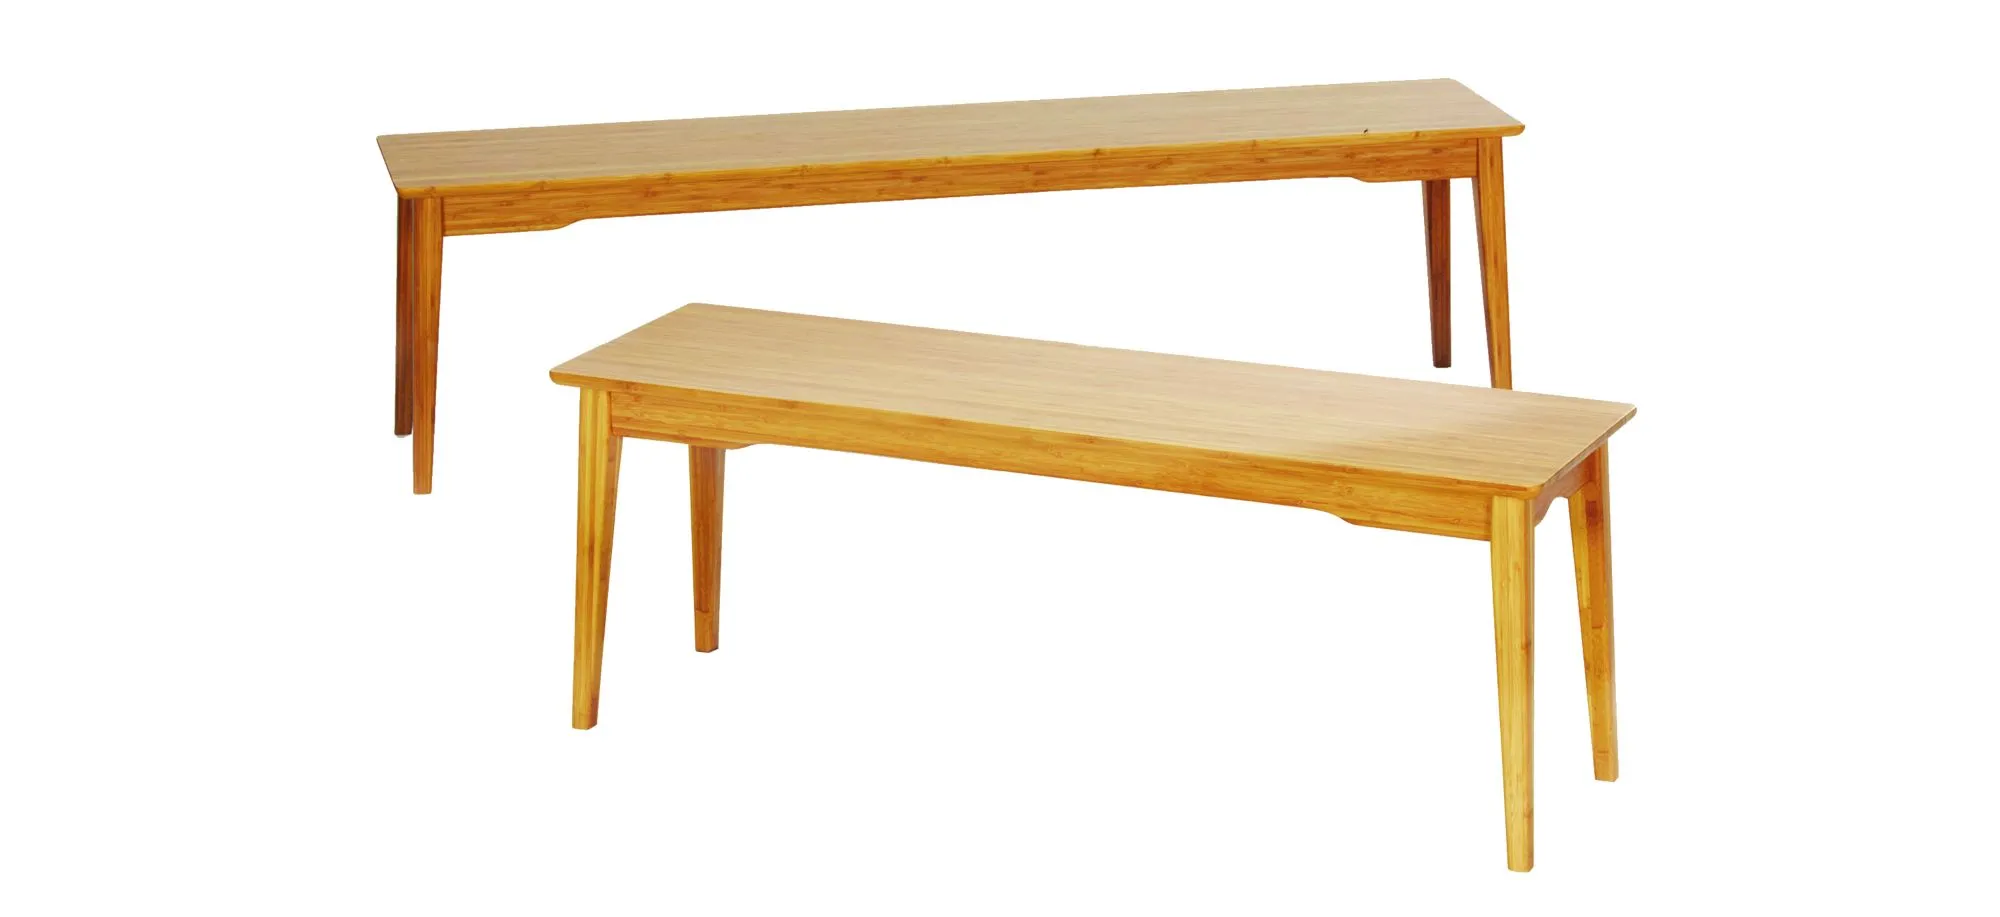 Currant Short Dining Bench in Caramelized by Greenington